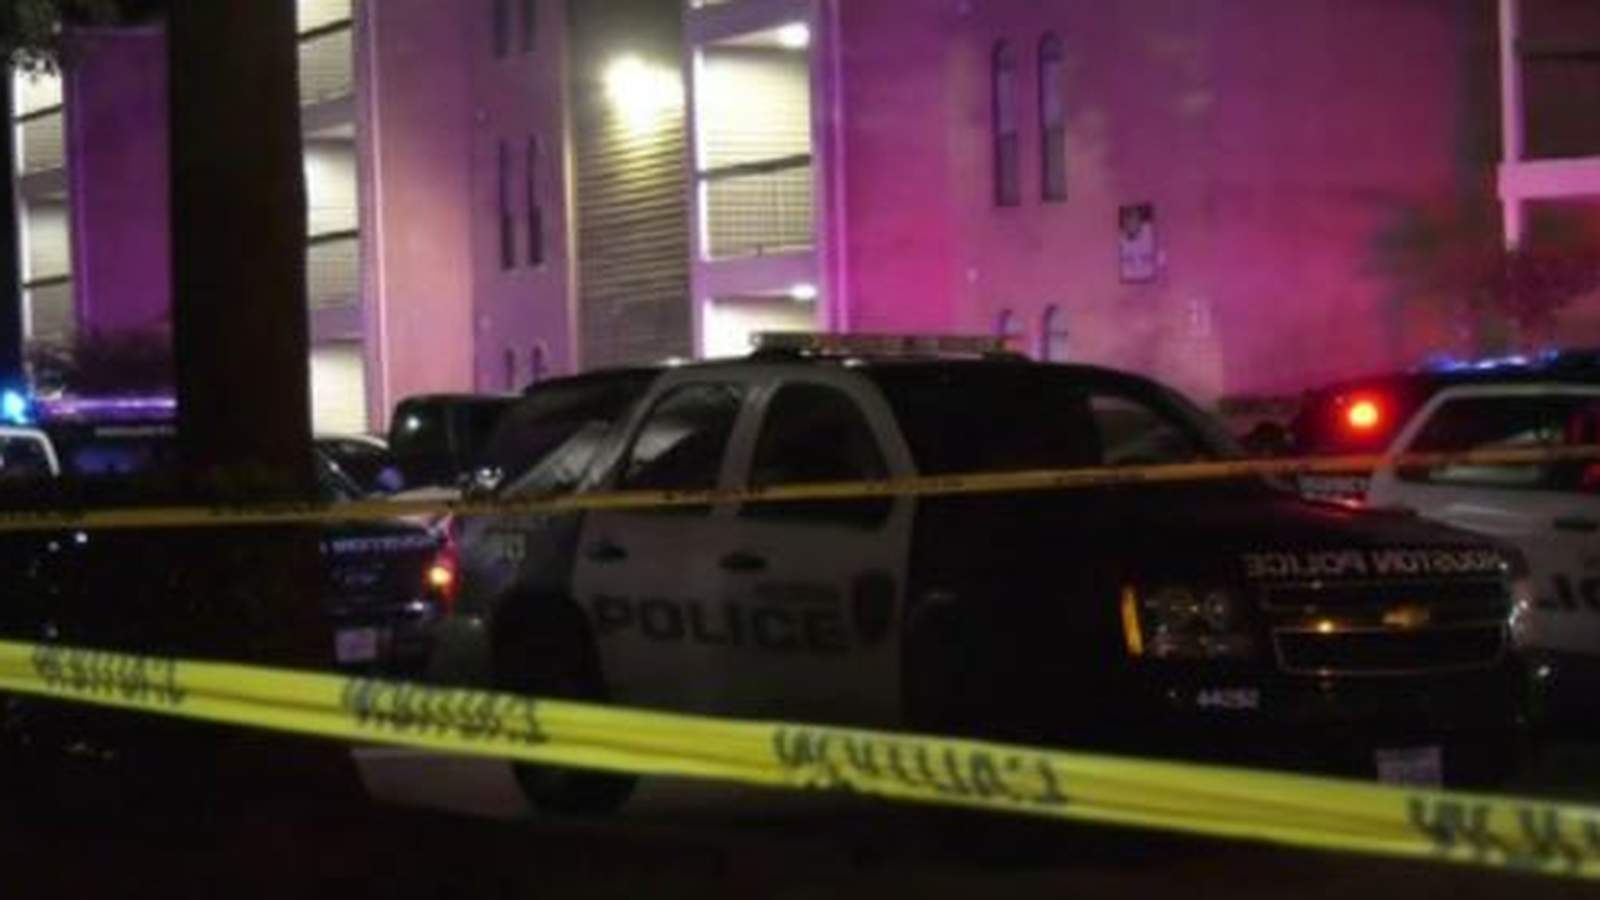 Man fatally shot in back of apartment complex in Alief, police say